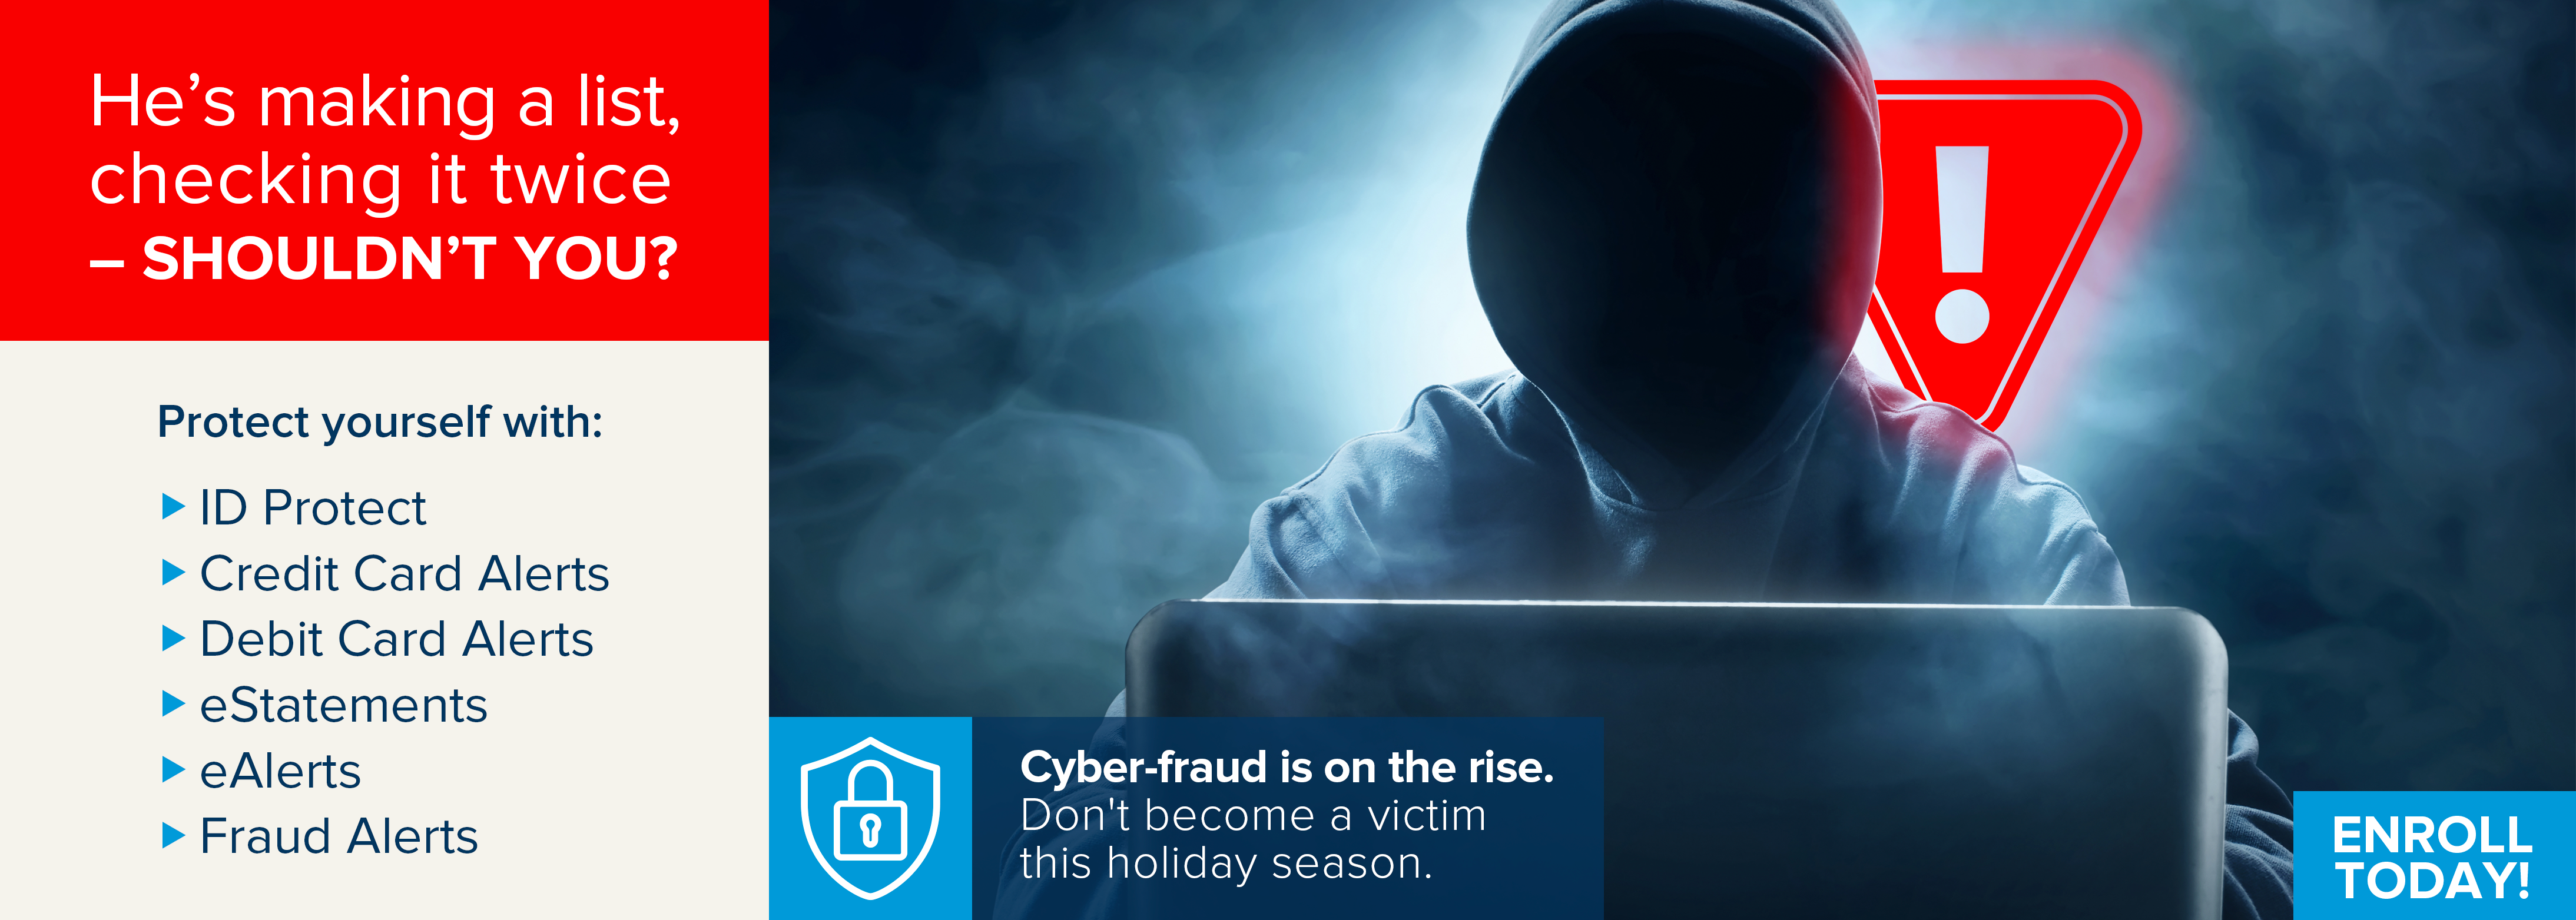 Fraud is on the rise. Learn how to protect yourself and your account.